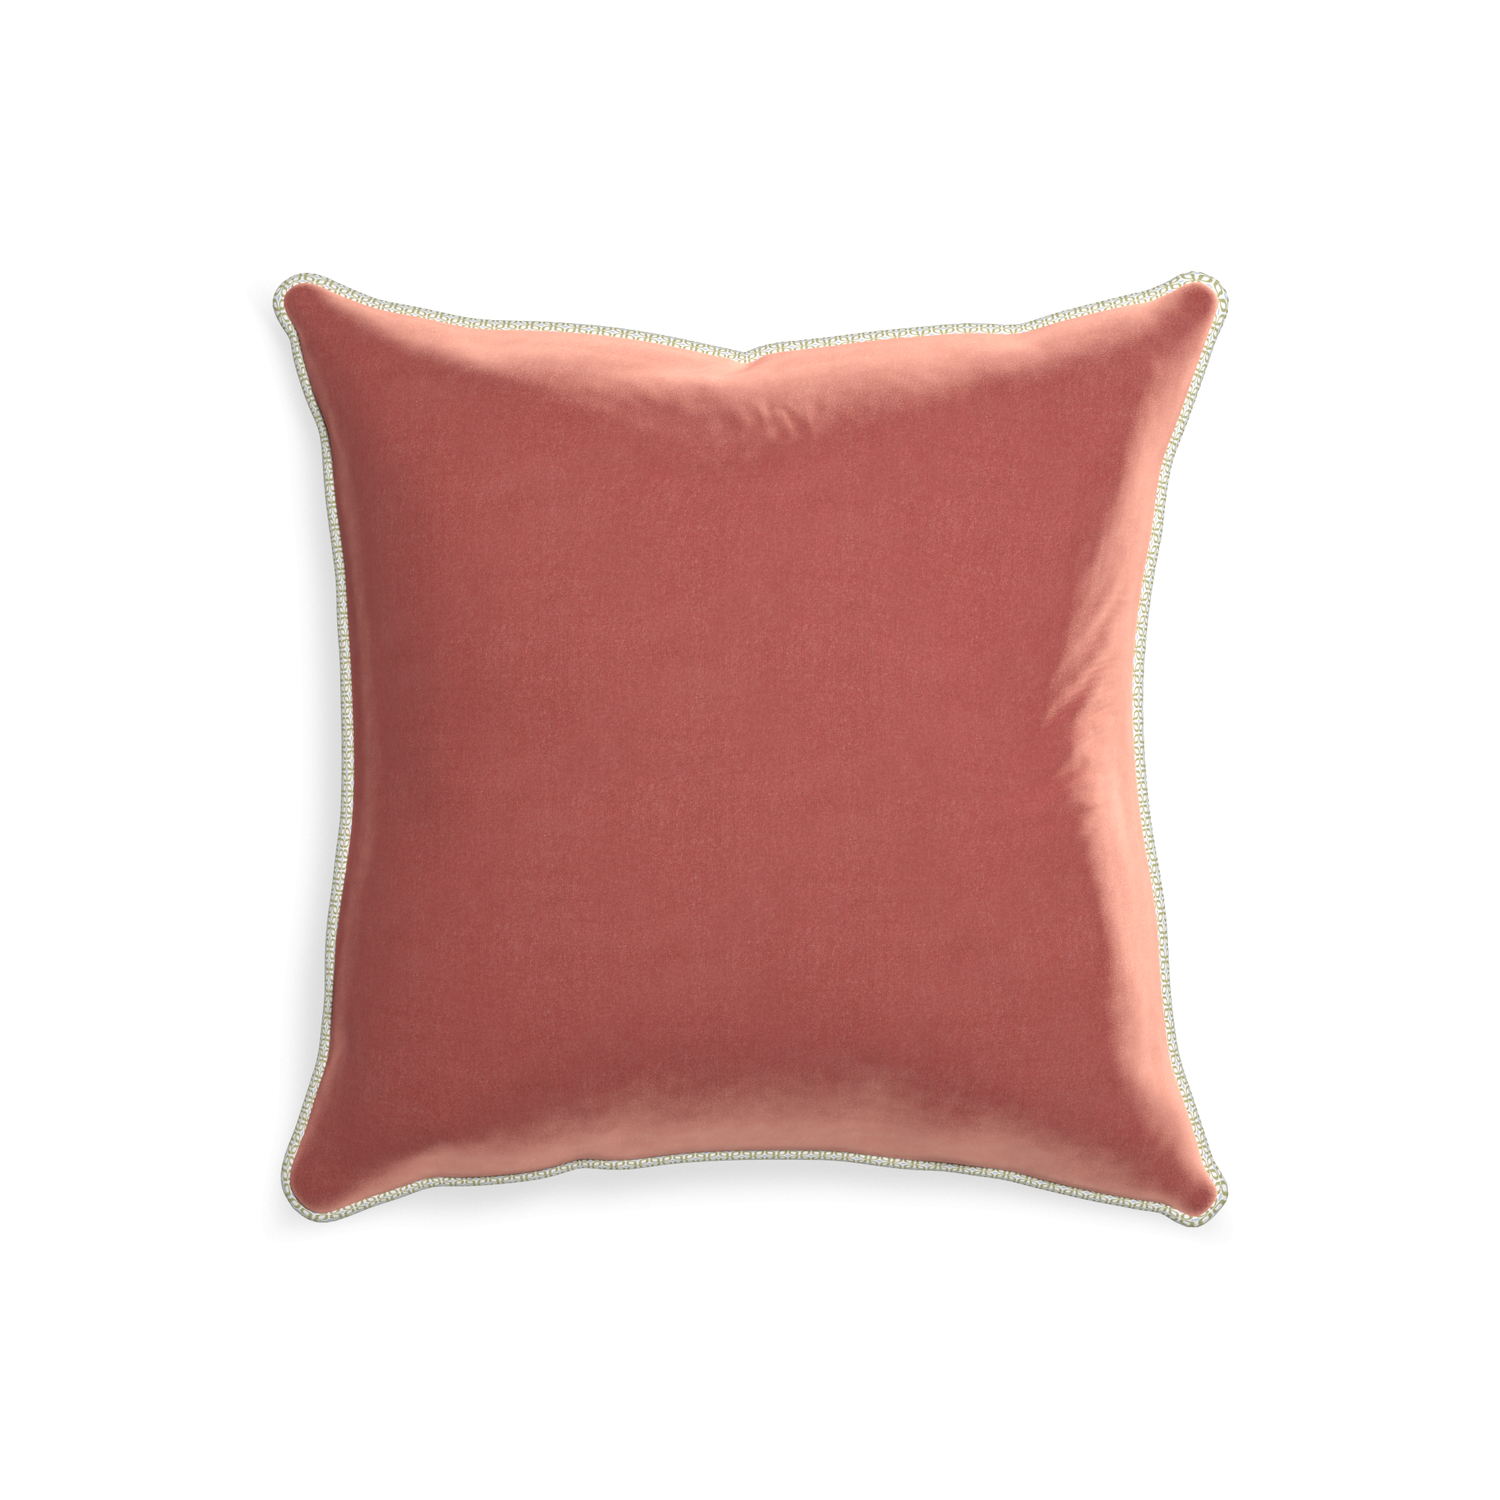 20-square cosmo velvet custom pillow with l piping on white background